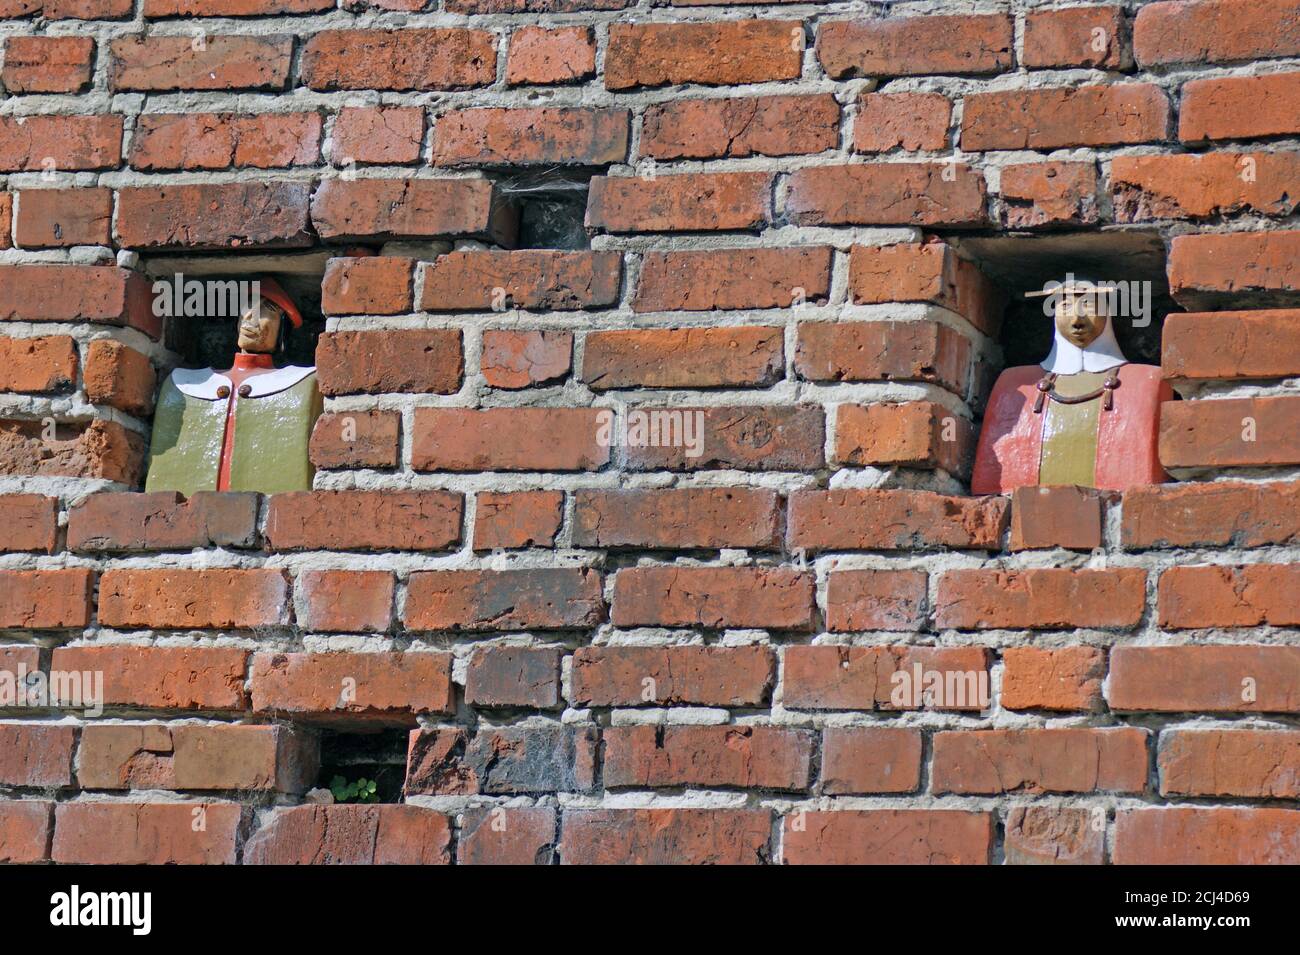 Teutonic Order townspeople figures seemingly look out holes in the brick wall located in the old town of Torun, Poland. Stock Photo